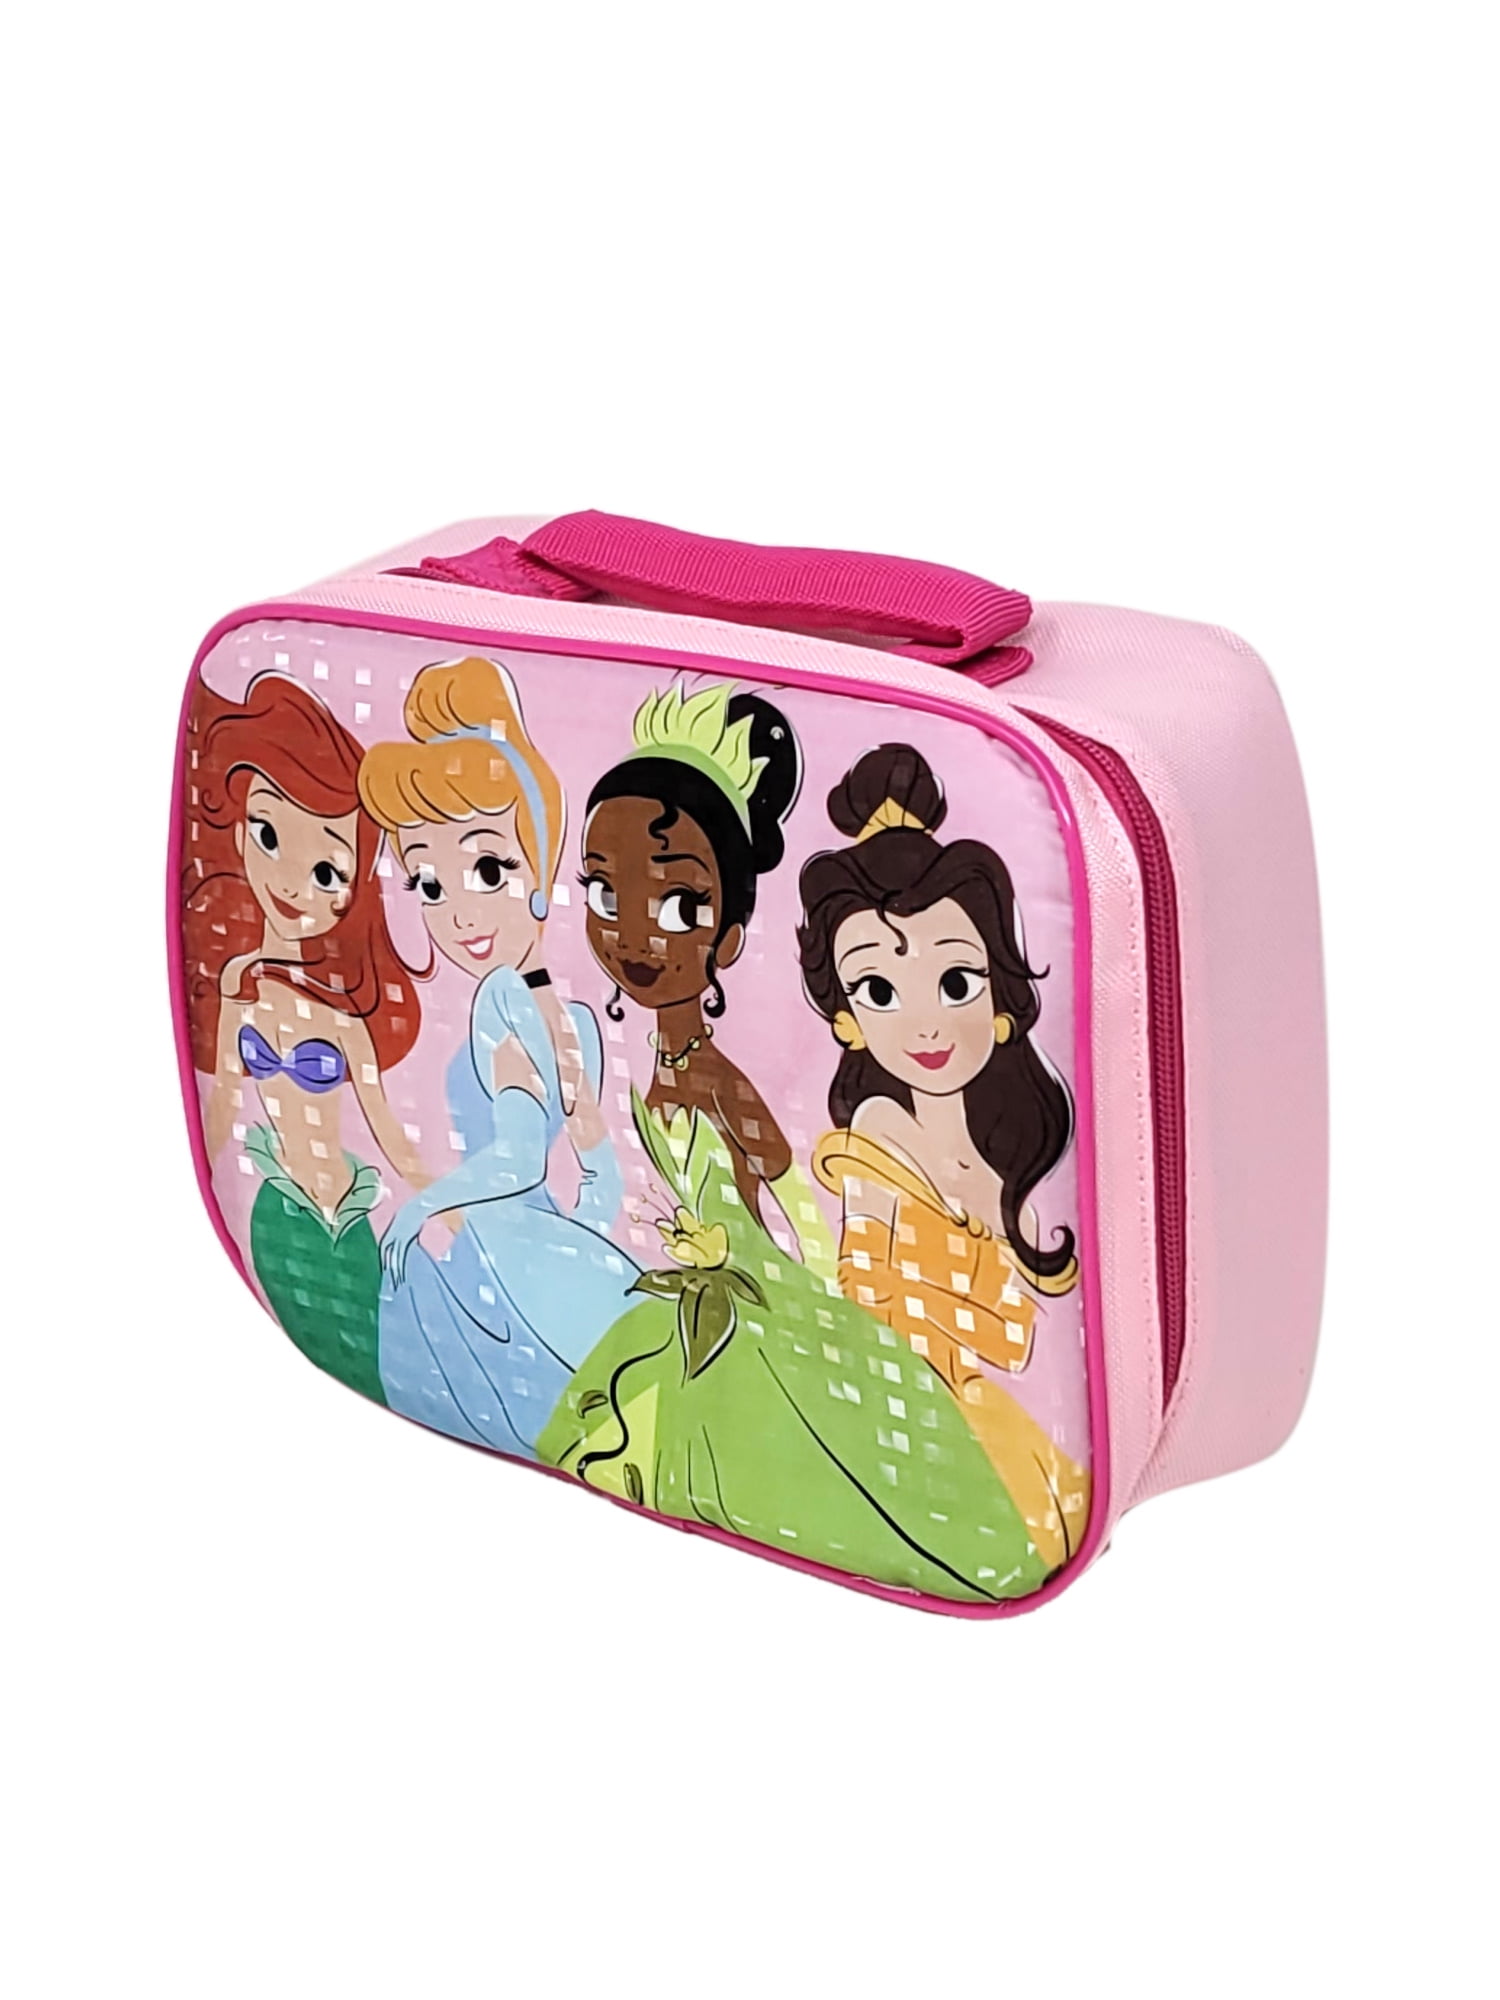 Disney Princess Backpack and Insulated Lunch Bag Set Tiana Ariel Girls –  Open and Clothing